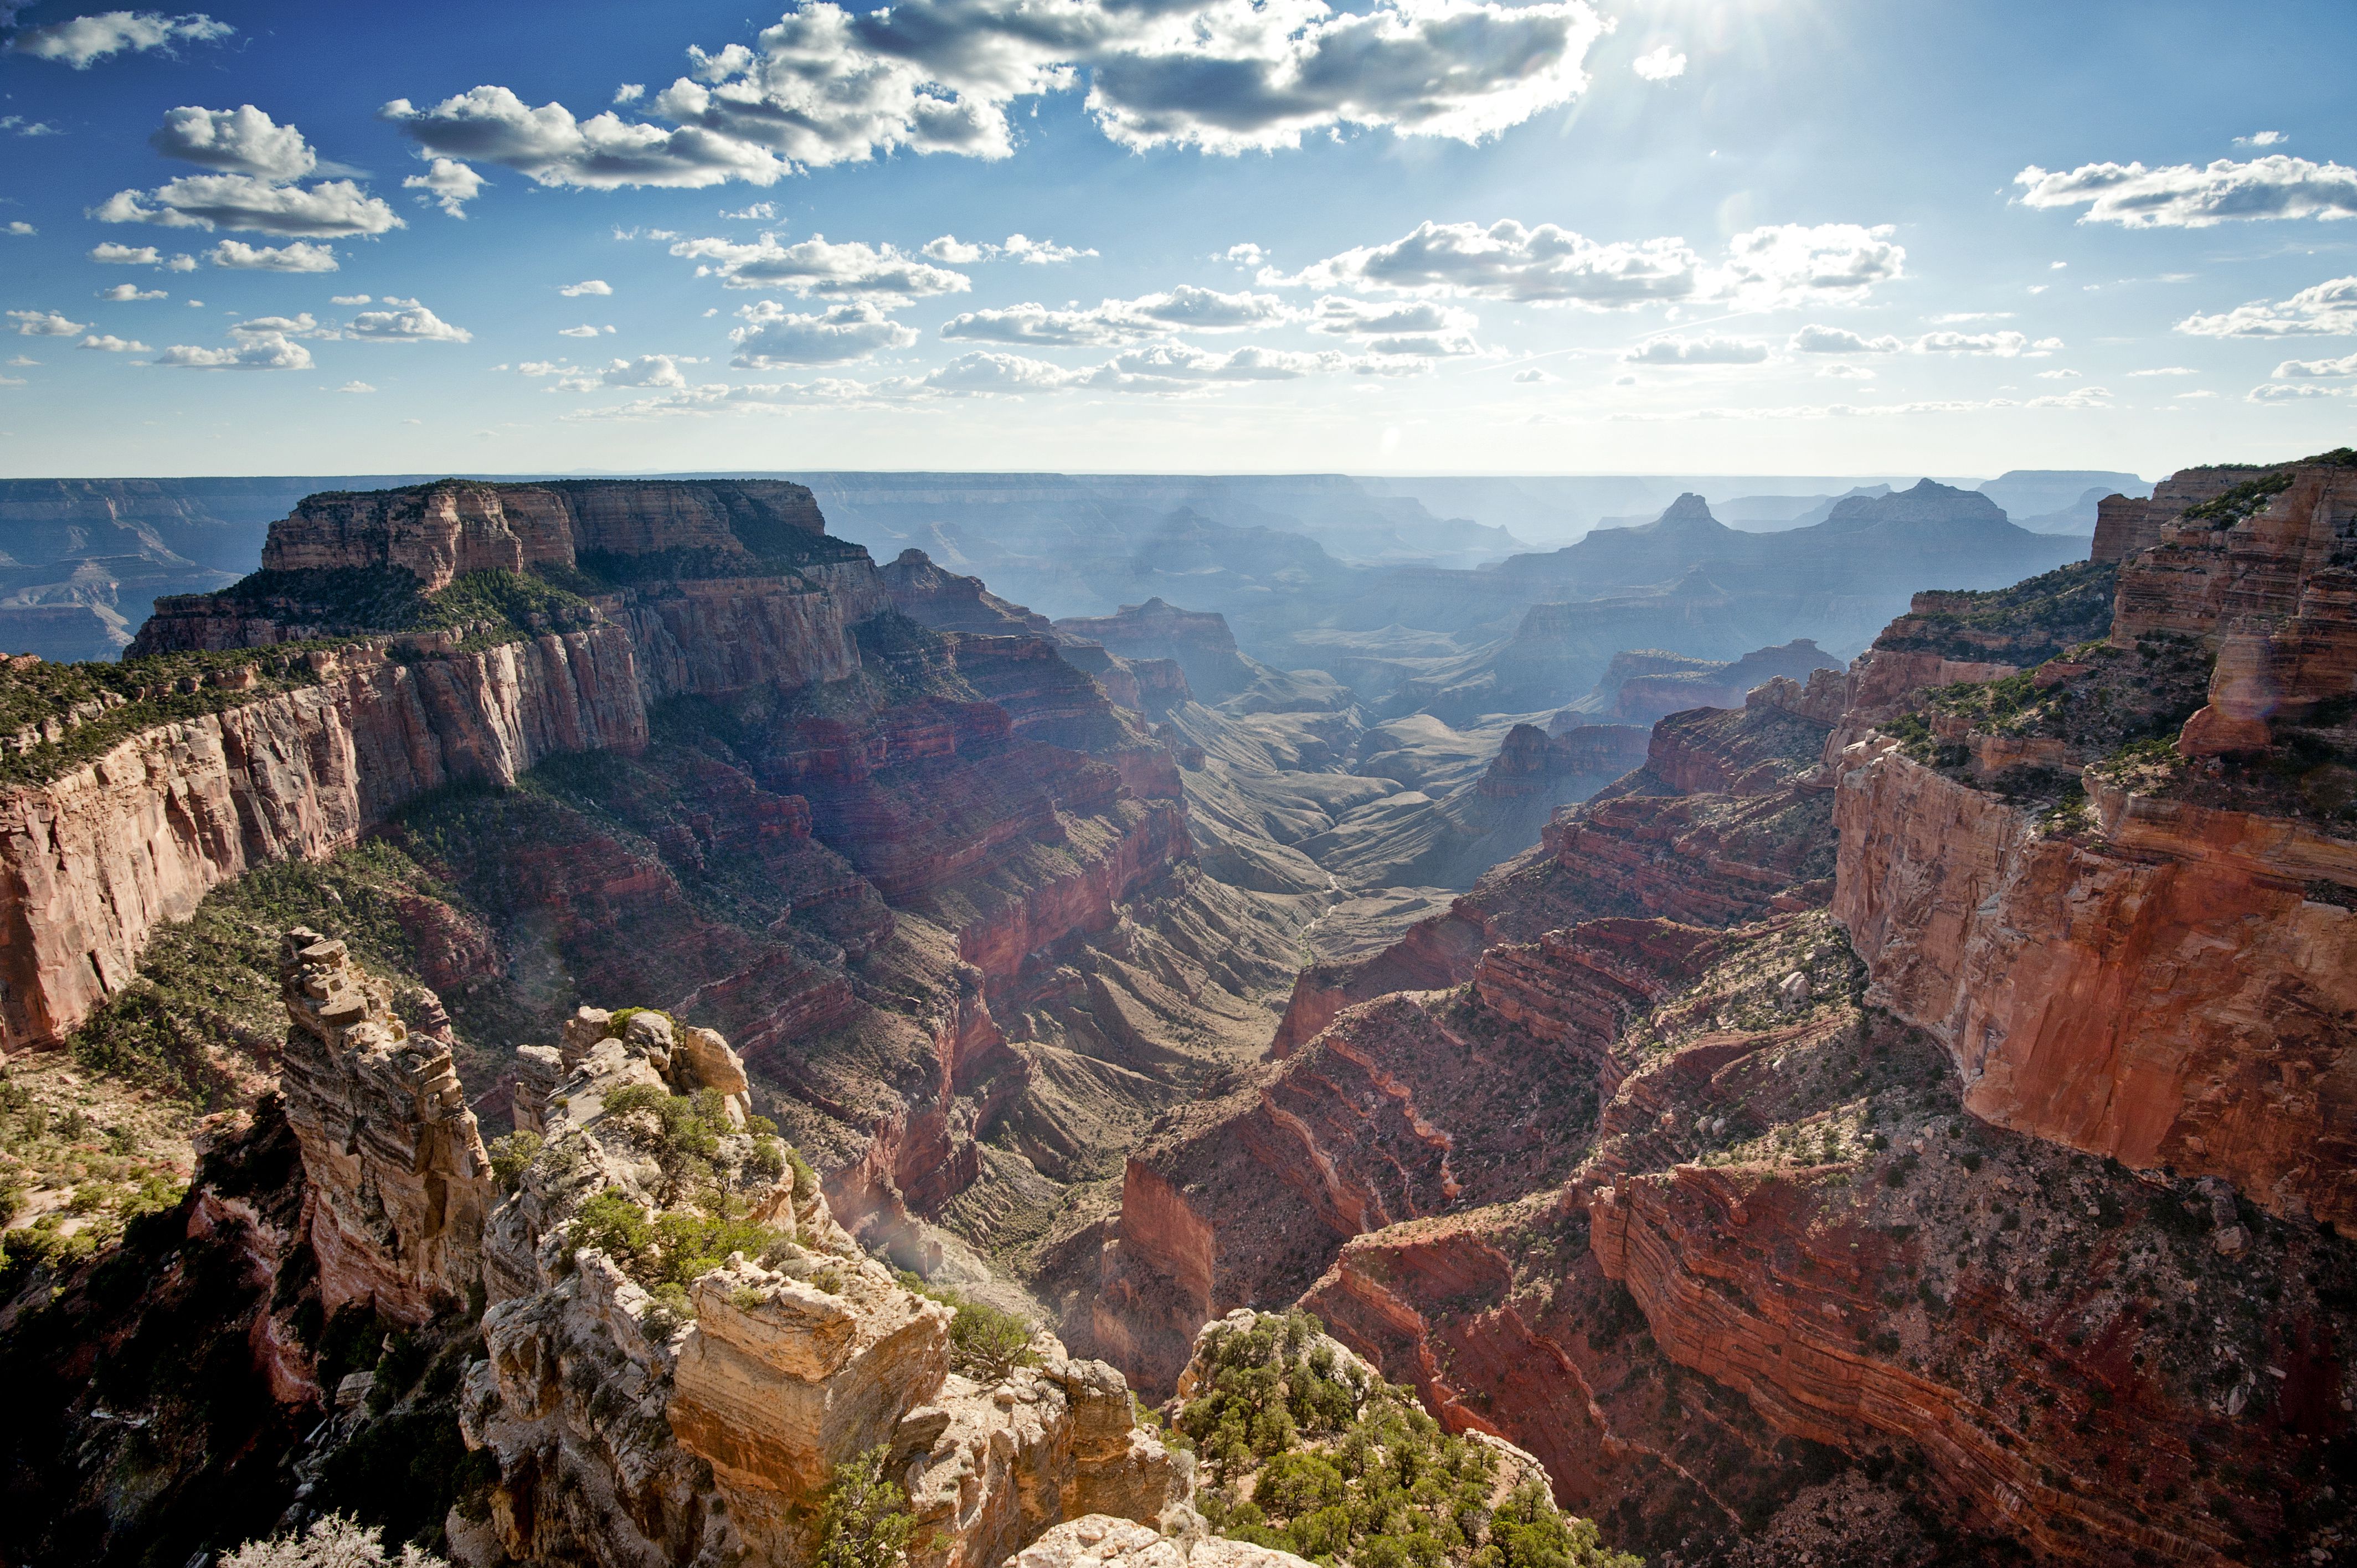 Visit the South Rim of the Grand Canyon in 1 or 2 Days